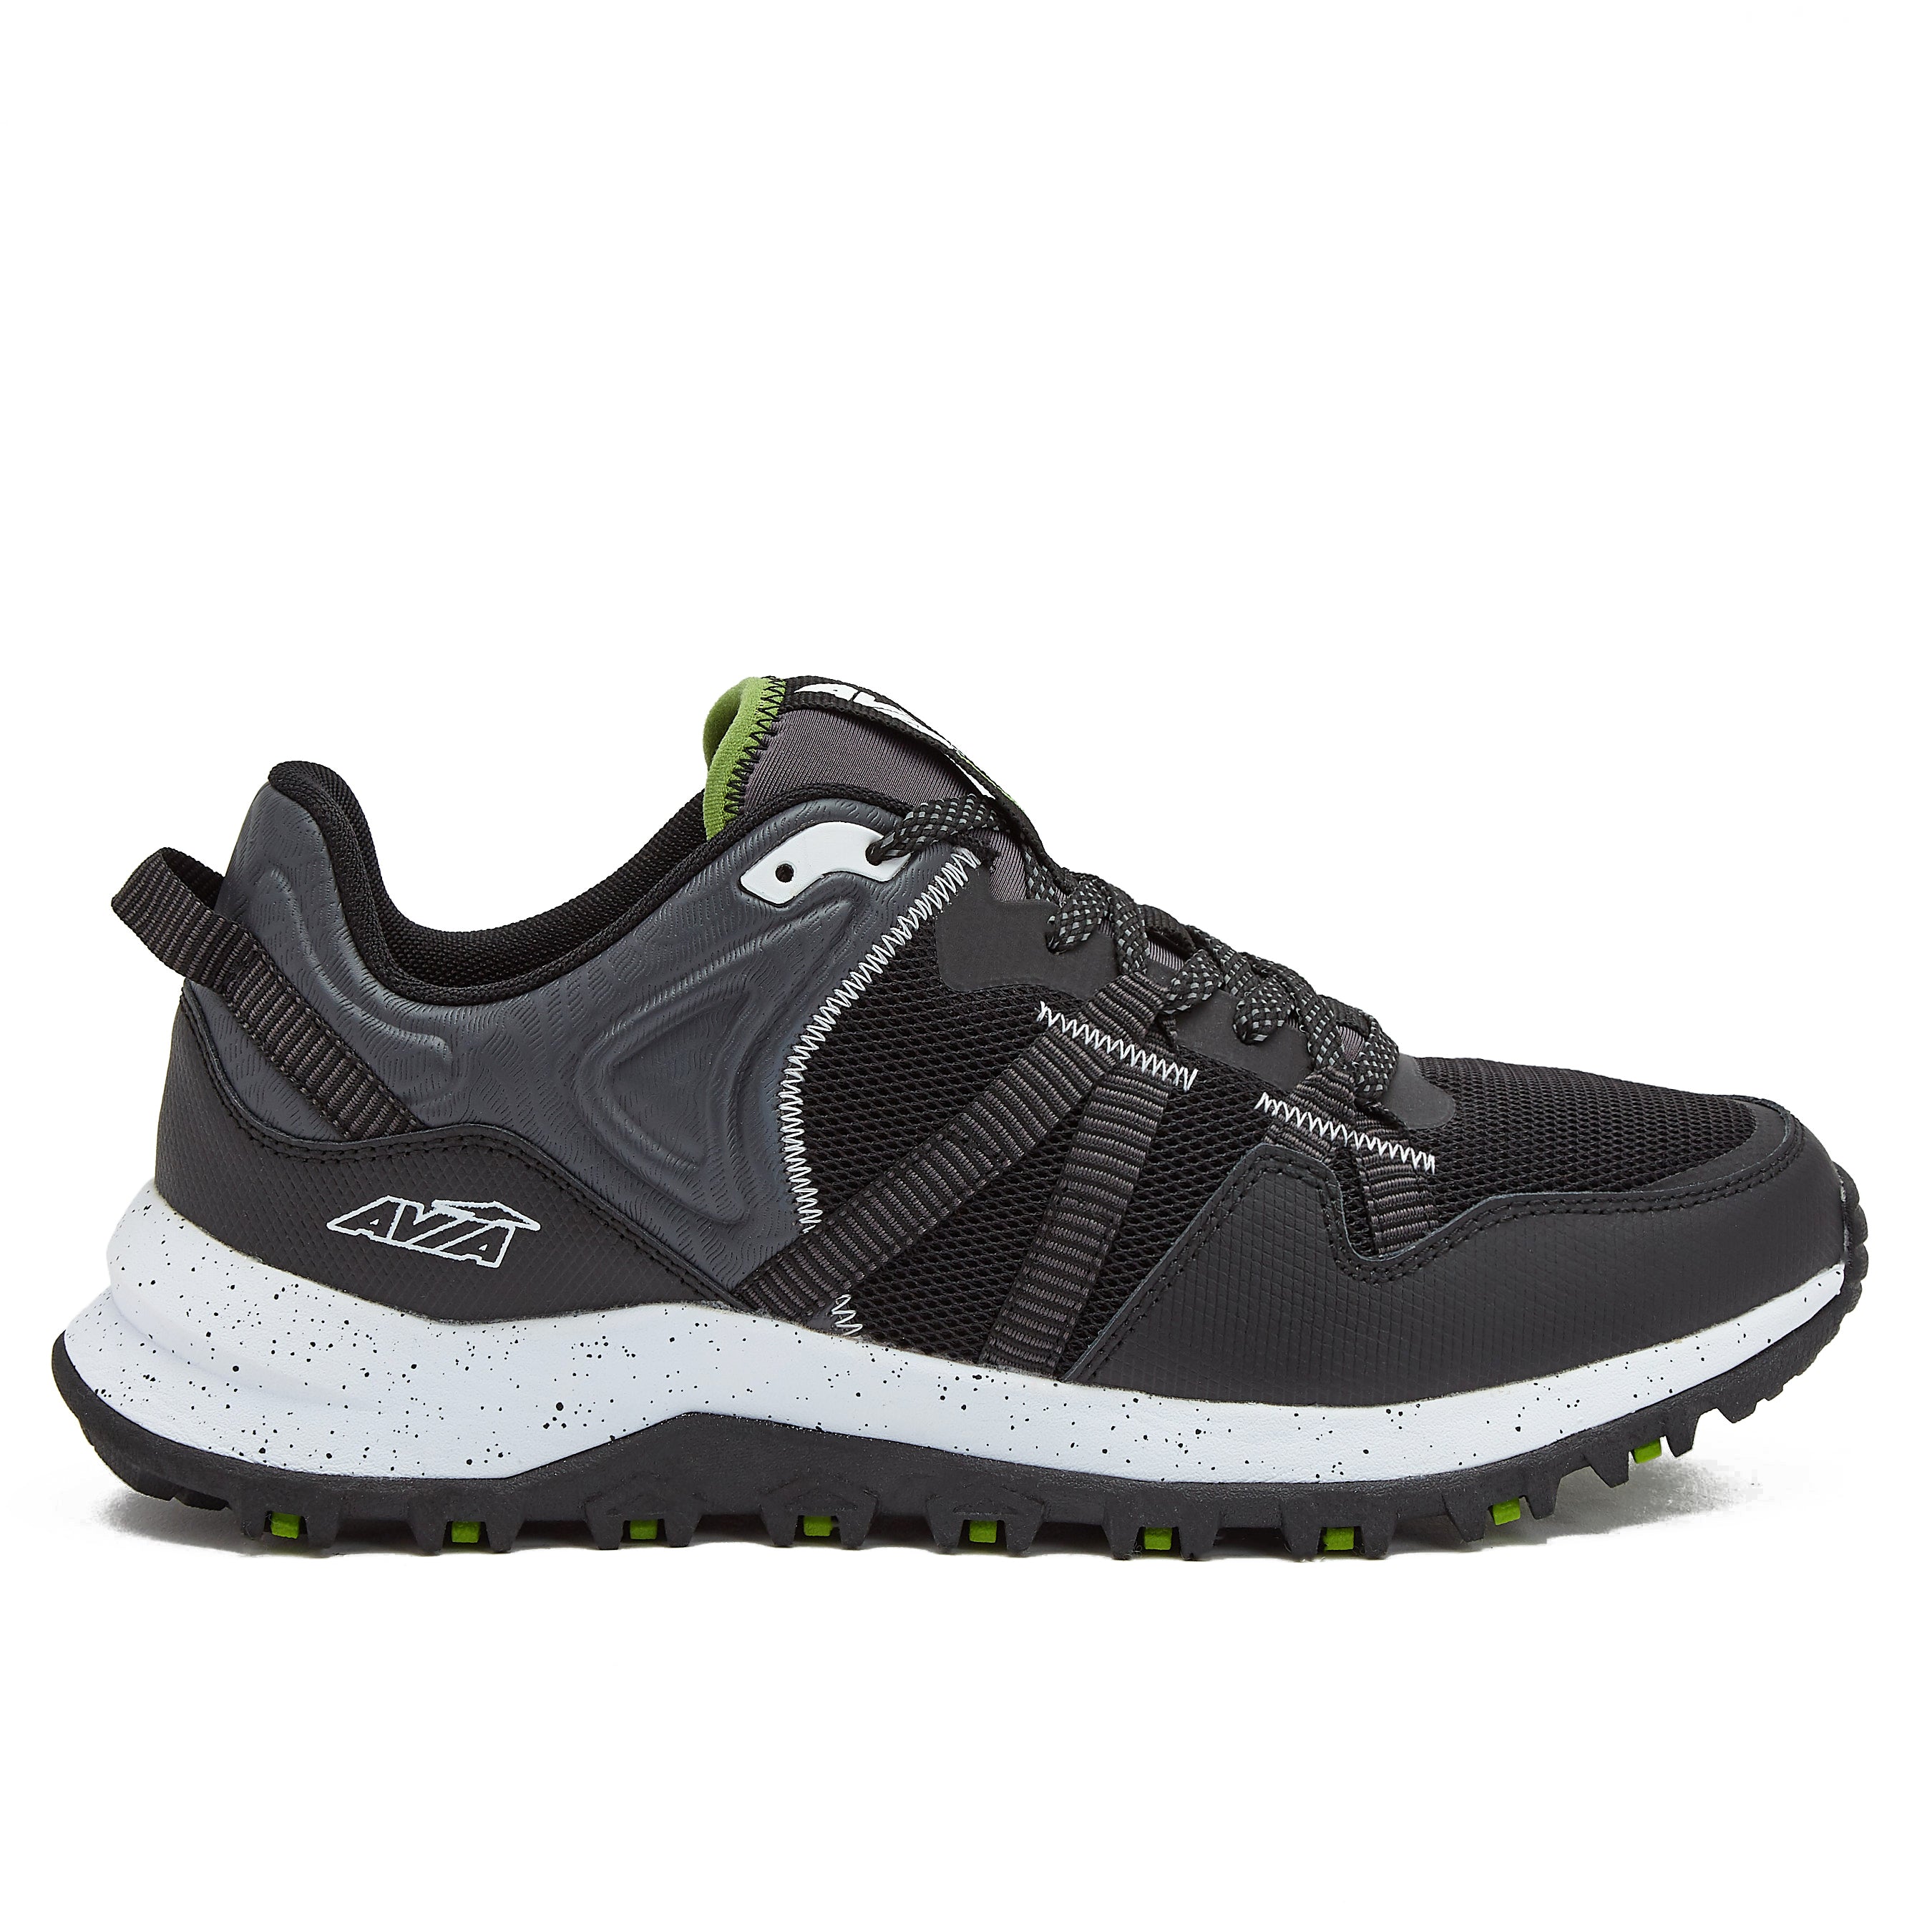 AVIA Sport Shoes :: Sport Shoes Available, Sport shoes, Official archives  of Merkandi